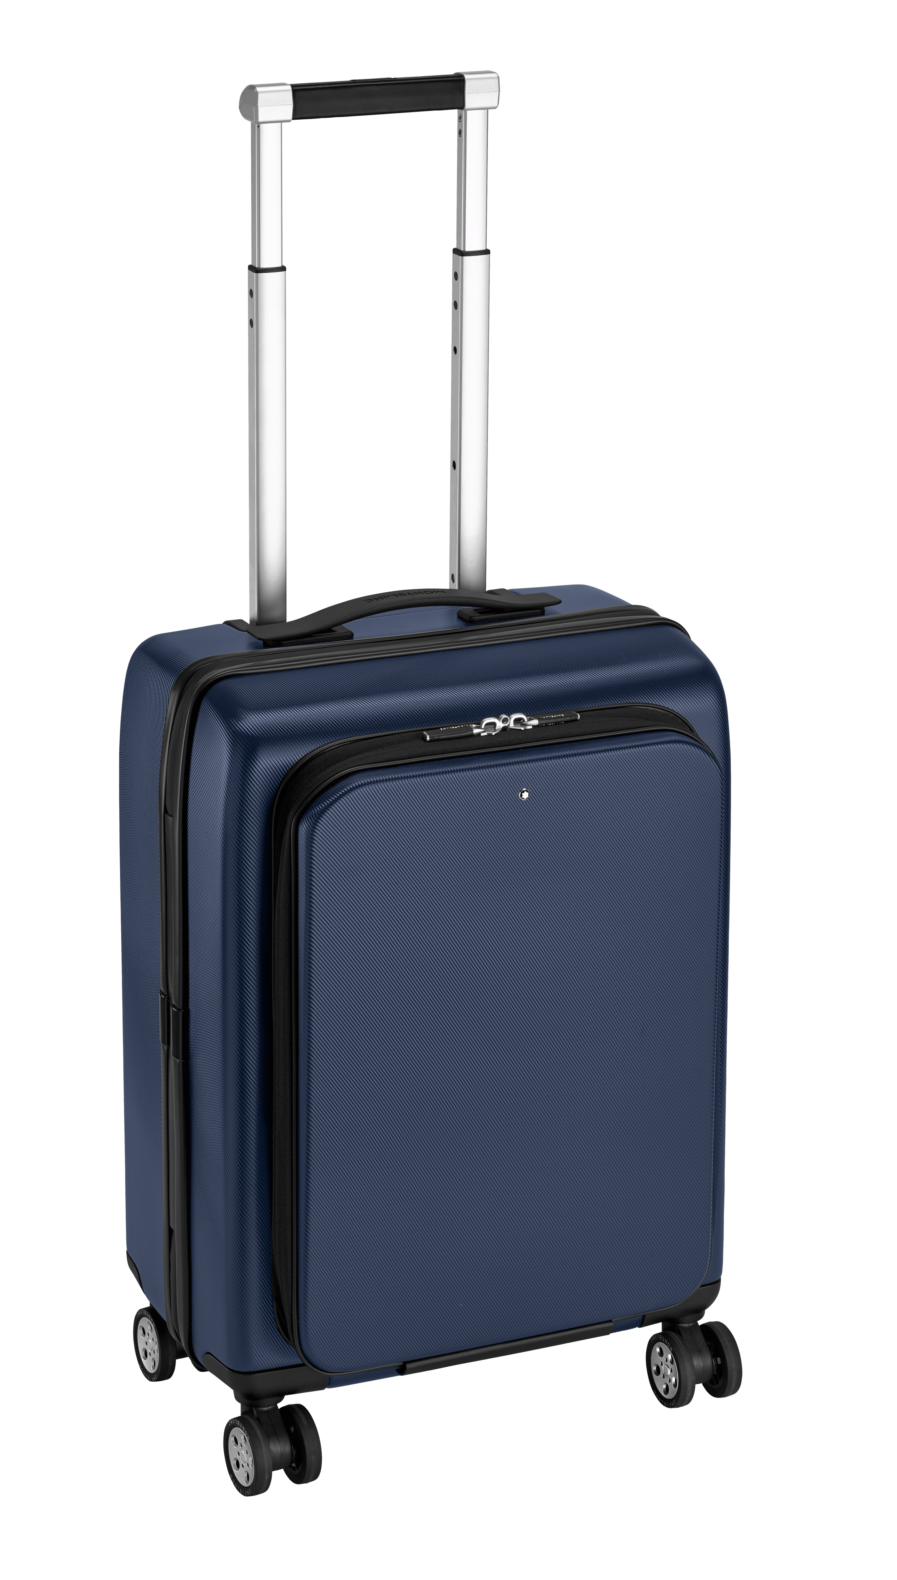 Valise compact 4 roues bleue